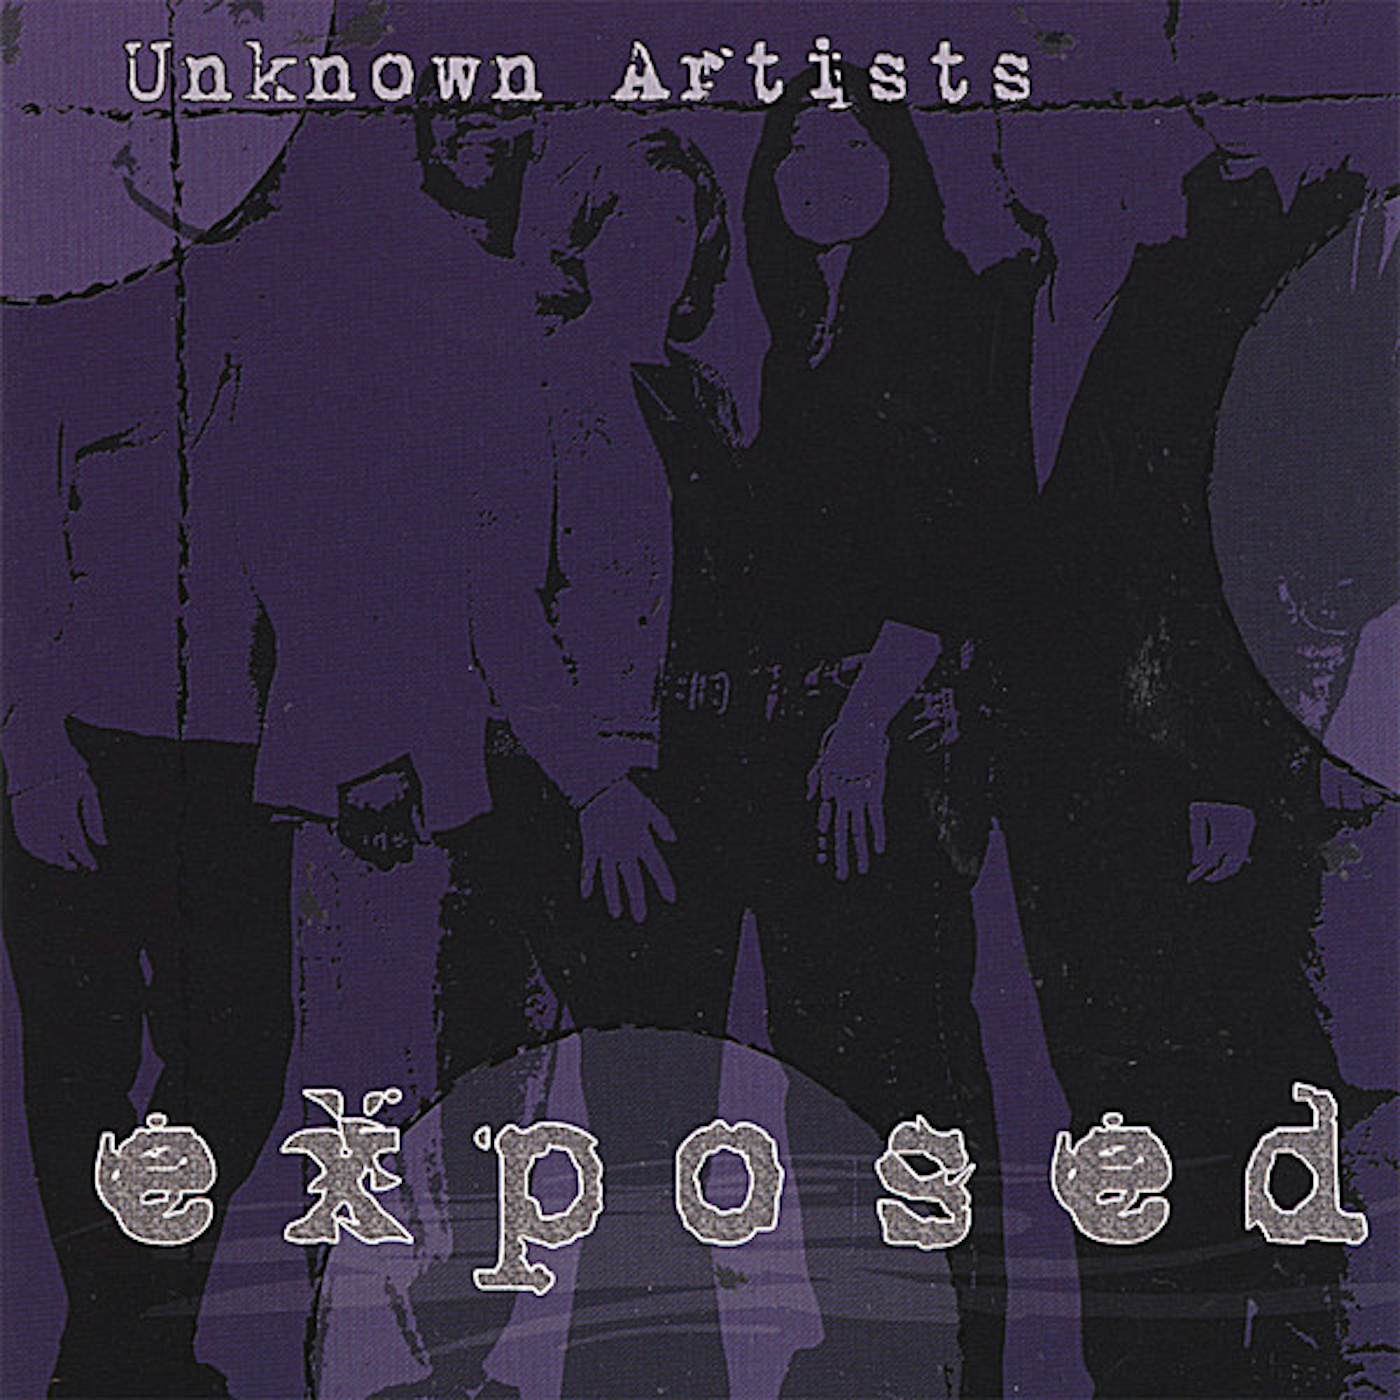 Unknown Artists EXPOSED CD